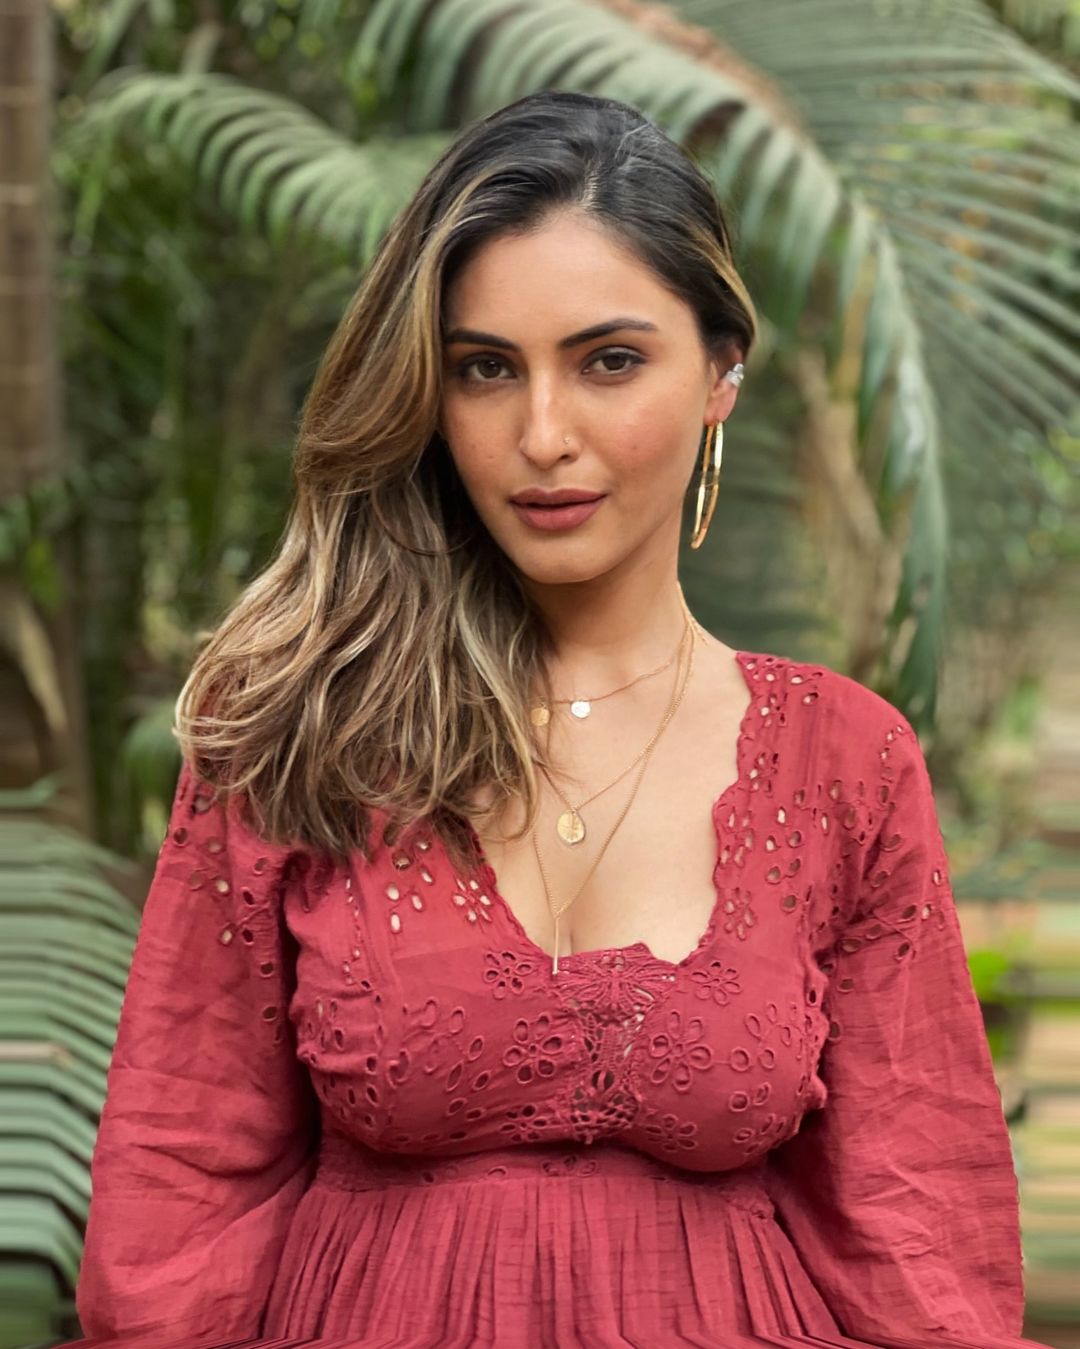 Stunning Actress Shivangi Verma Reveals How Social Media Plays A Significant Role In Her Career Life. Check It Out Here!